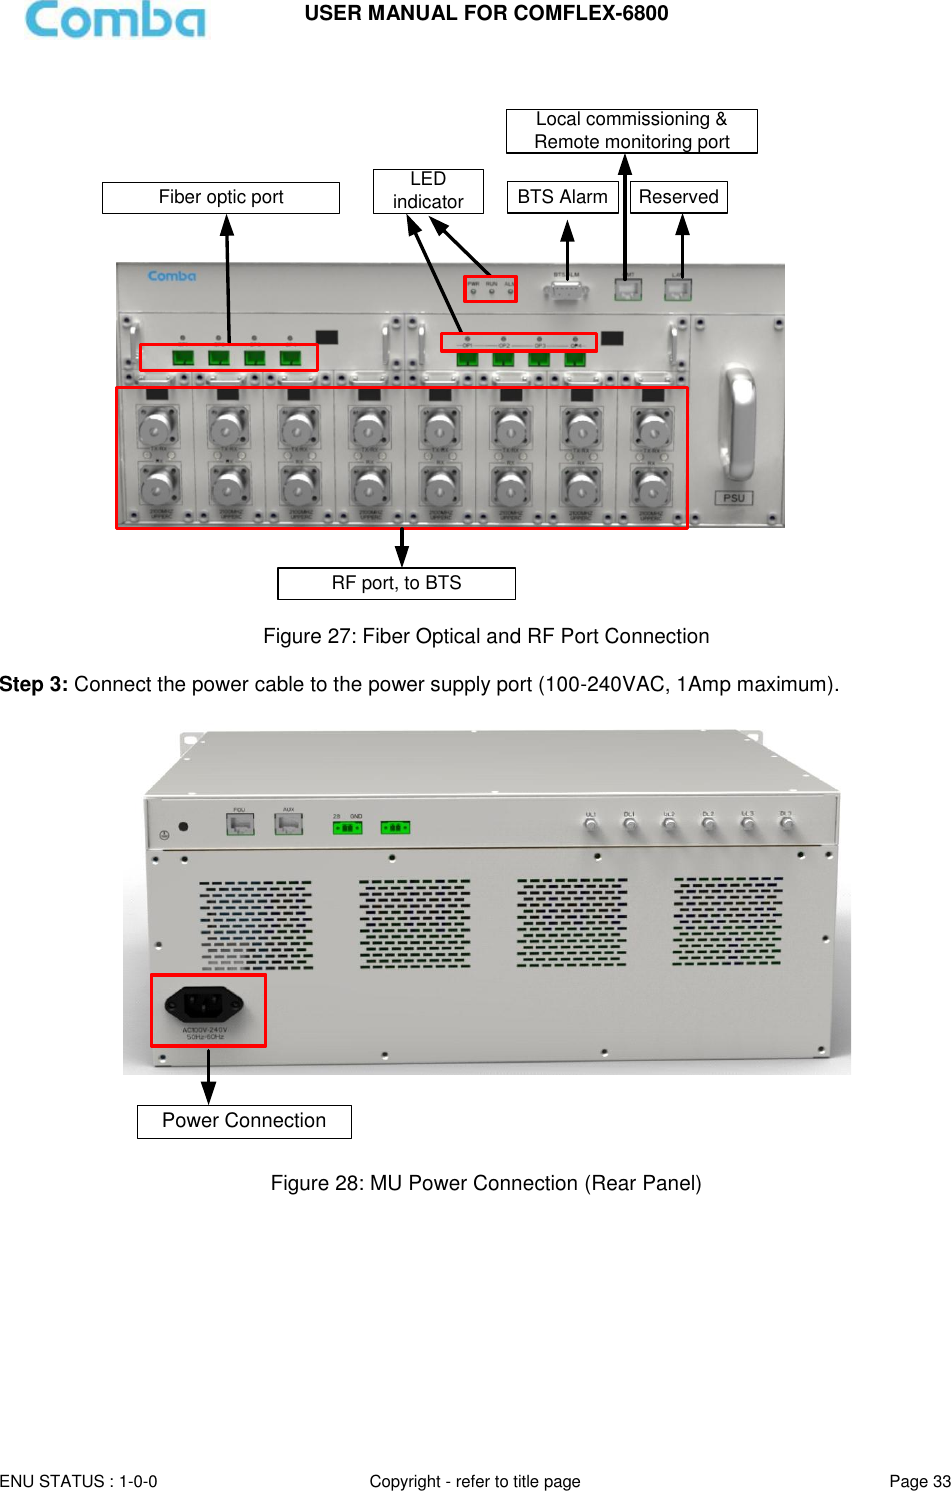 USER MANUAL FOR COMFLEX-6800   ENU STATUS : 1-0-0 Copyright - refer to title page Page 33      Local commissioning &amp; Remote monitoring portBTS Alarm ReservedFiber optic portRF port, to BTSLED indicator  Figure 27: Fiber Optical and RF Port Connection  Step 3: Connect the power cable to the power supply port (100-240VAC, 1Amp maximum).   Power Connection  Figure 28: MU Power Connection (Rear Panel)     